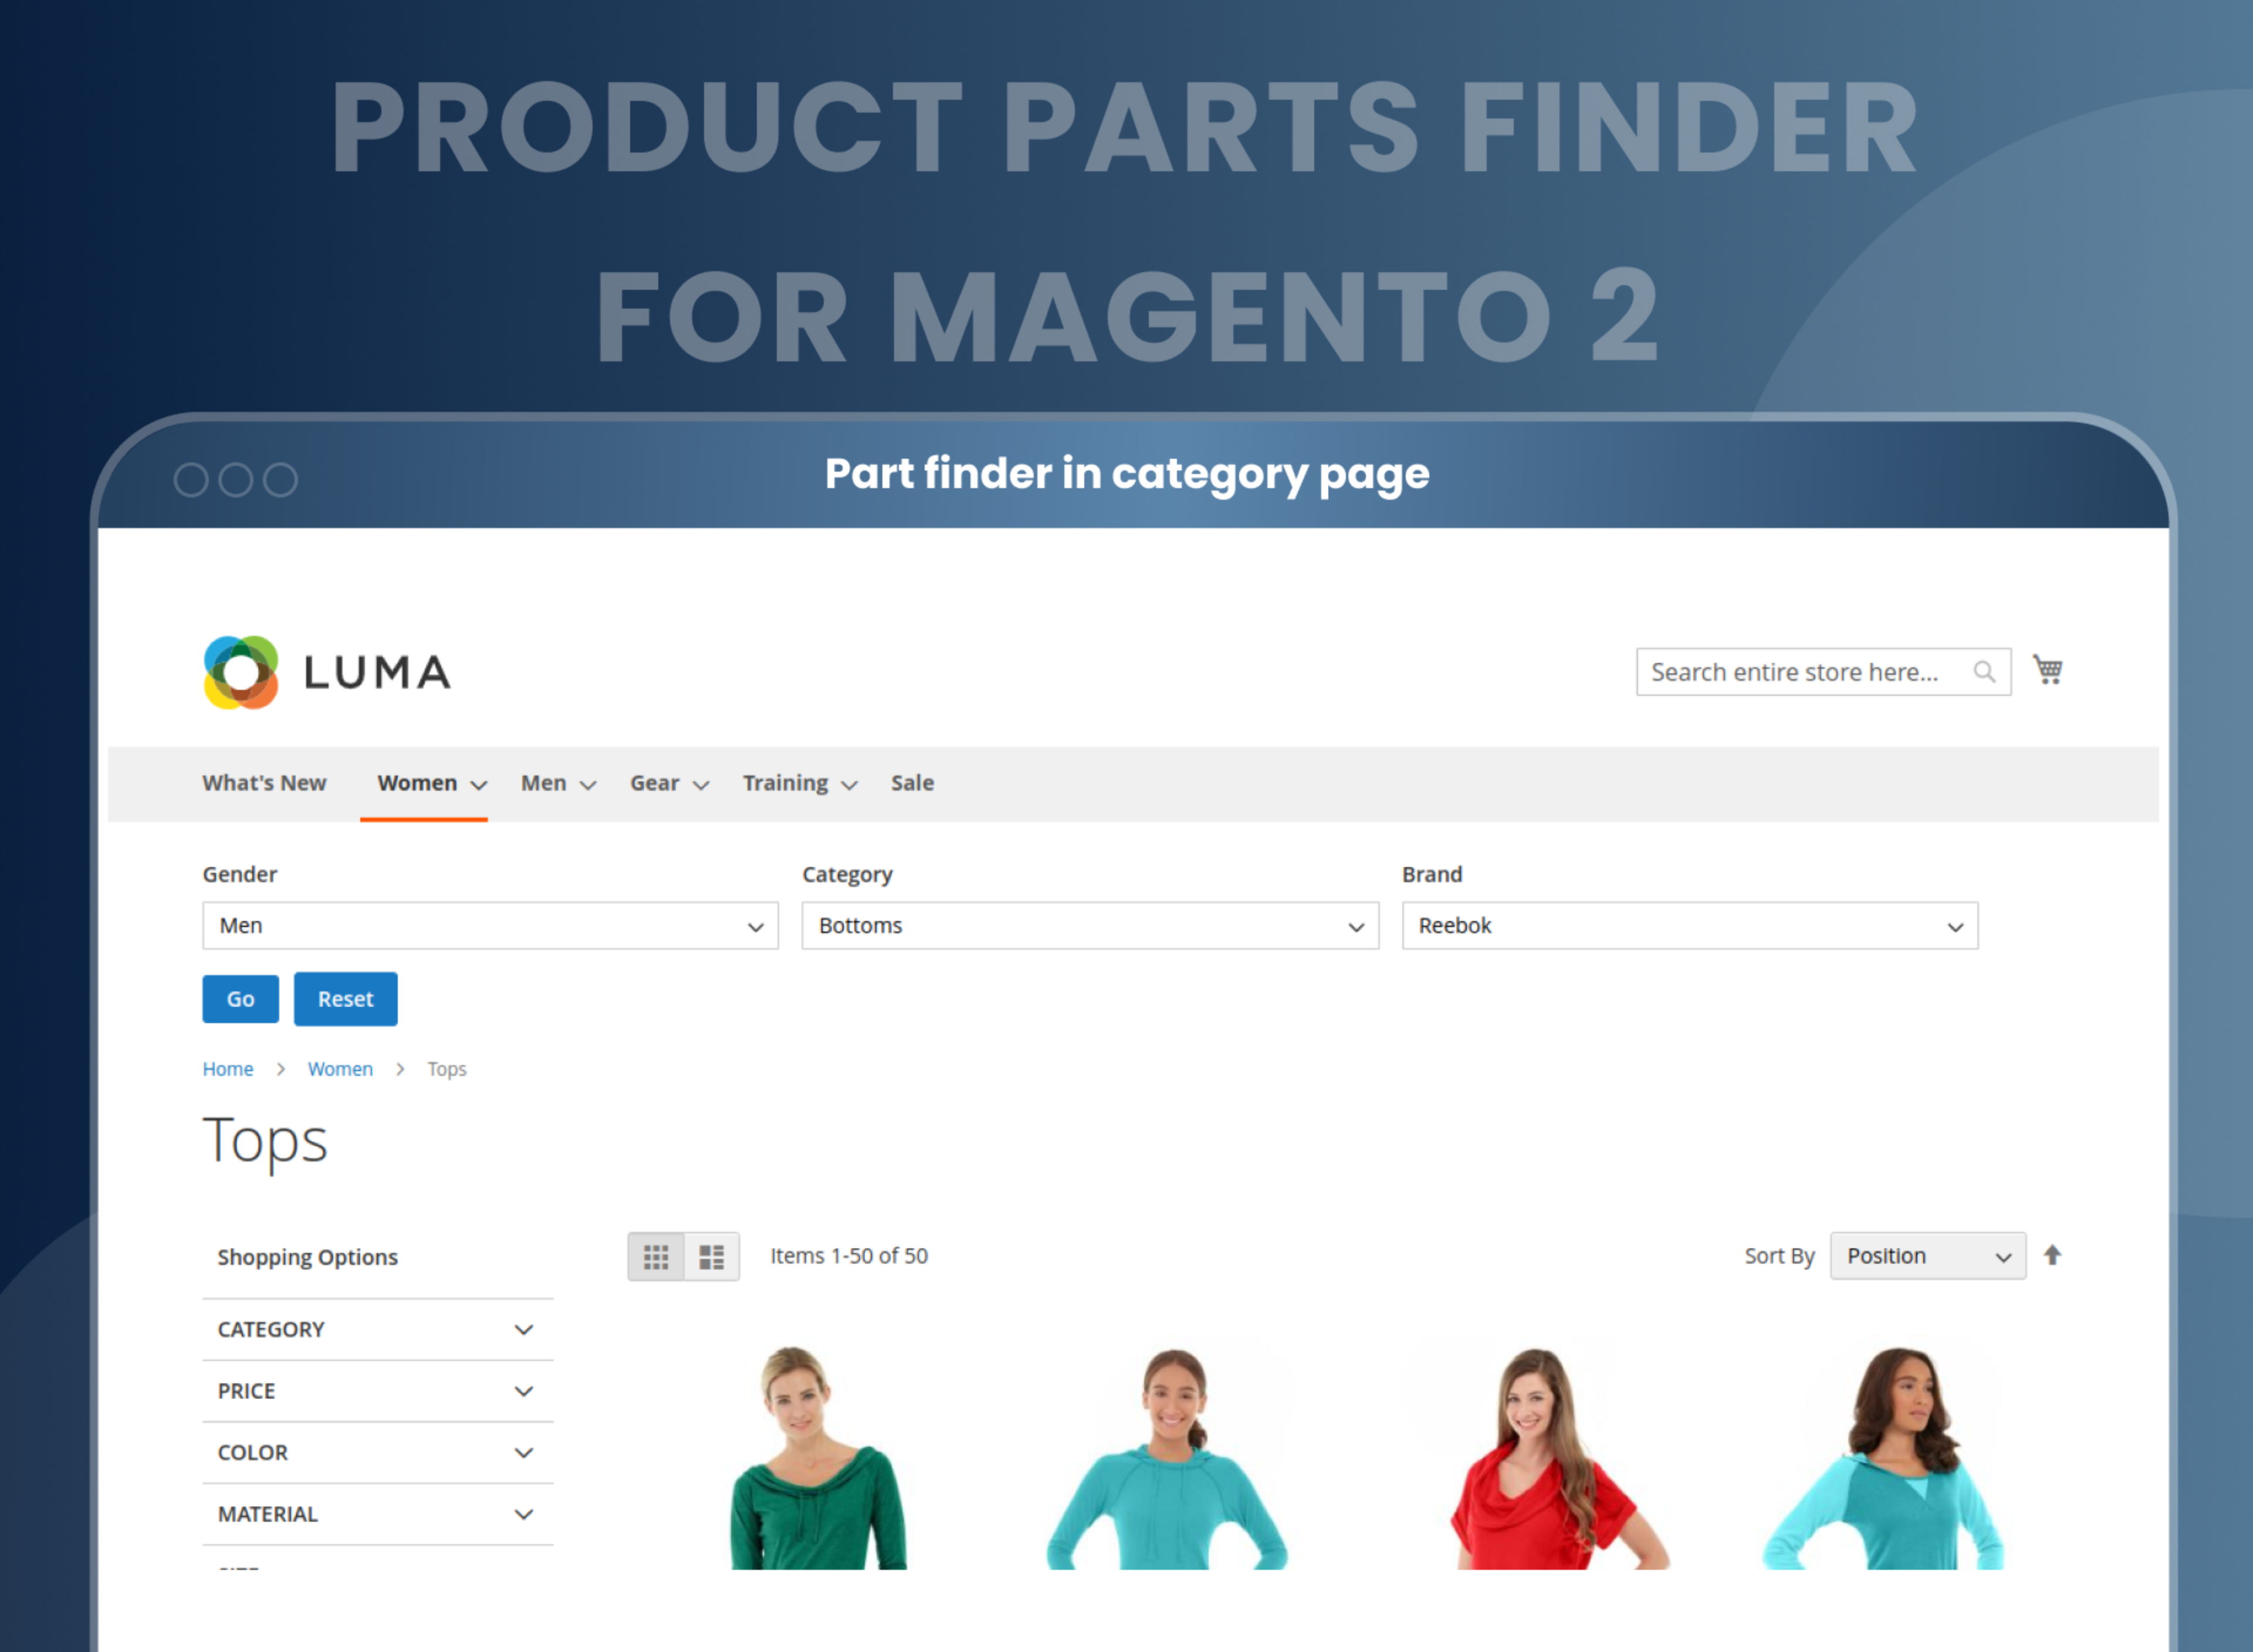 Part finder in category page